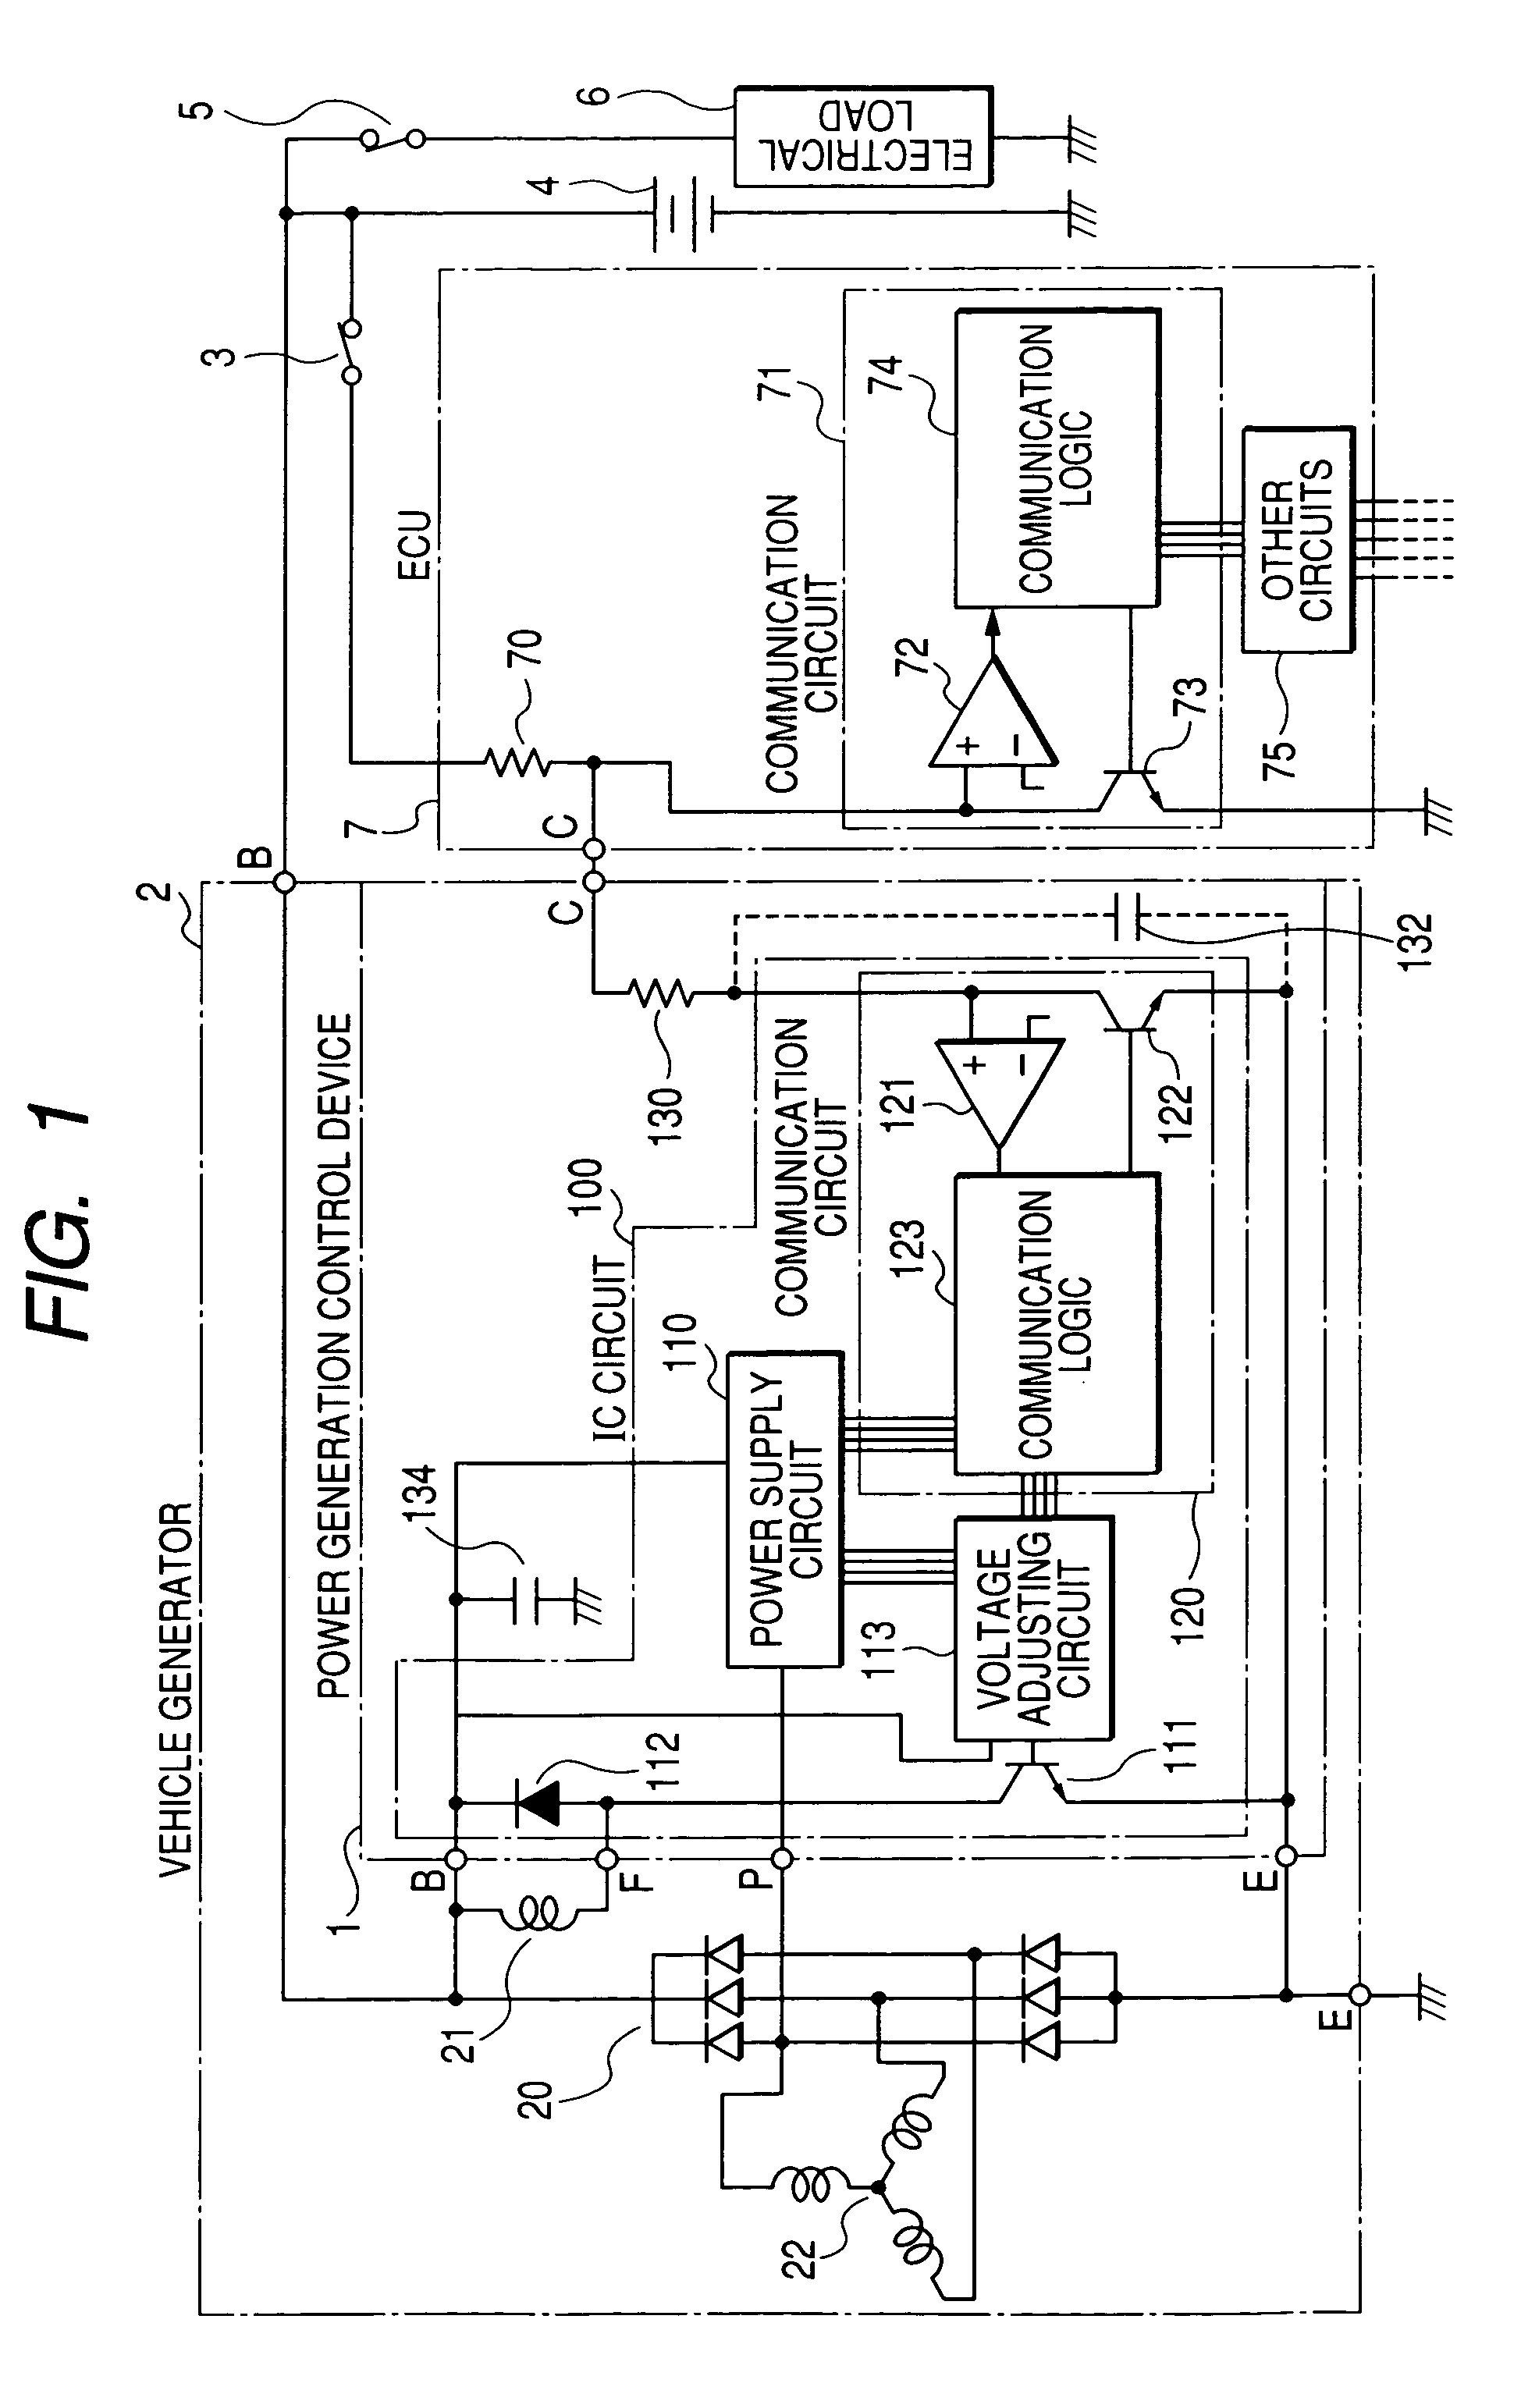 Power generation control device for vehicle generator